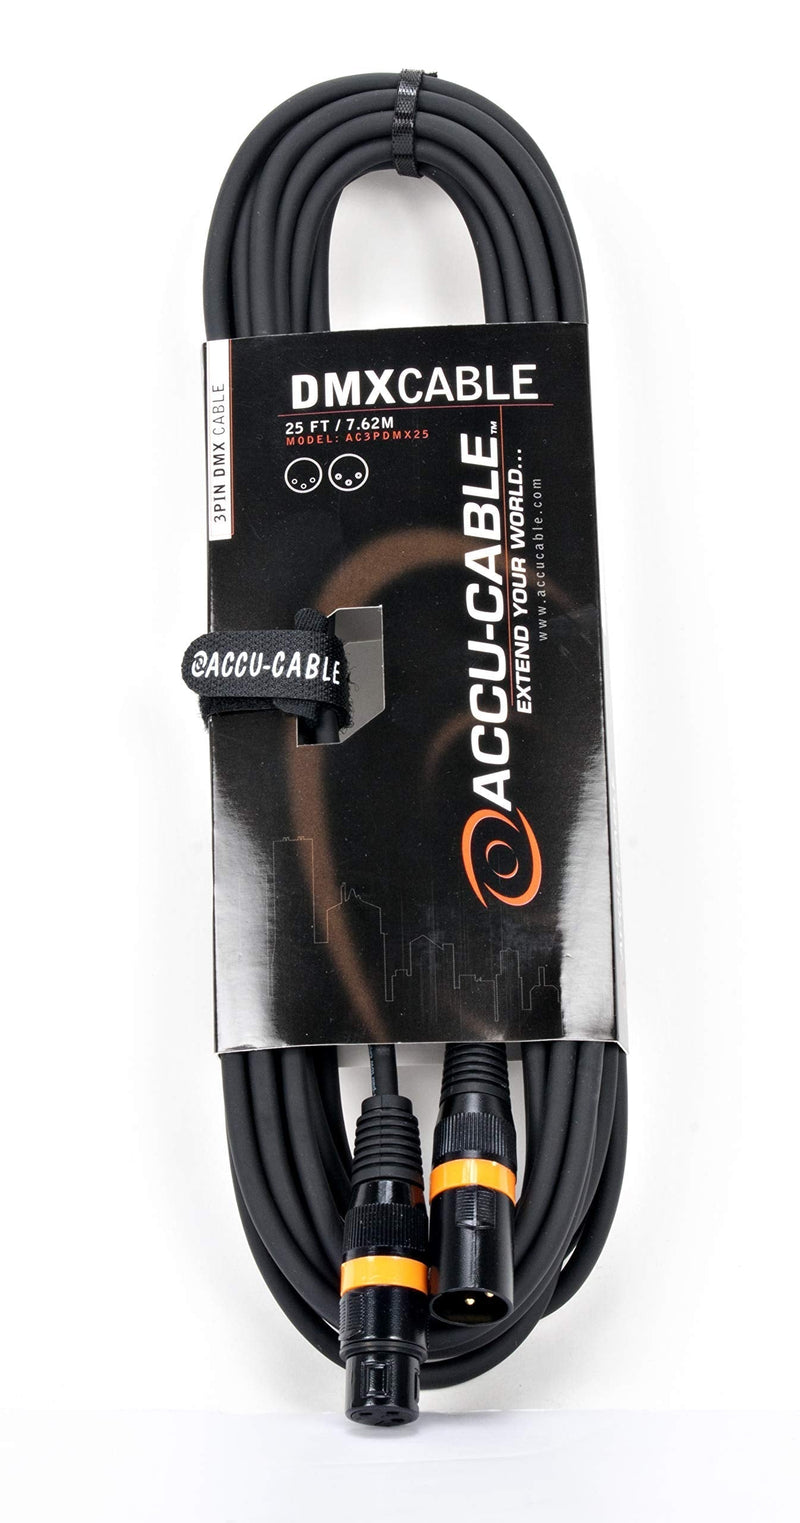  [AUSTRALIA] - Accu Cable 25 foot 3 pin true dmx cable rated at 110 ohms end to end to ensure no signal drop